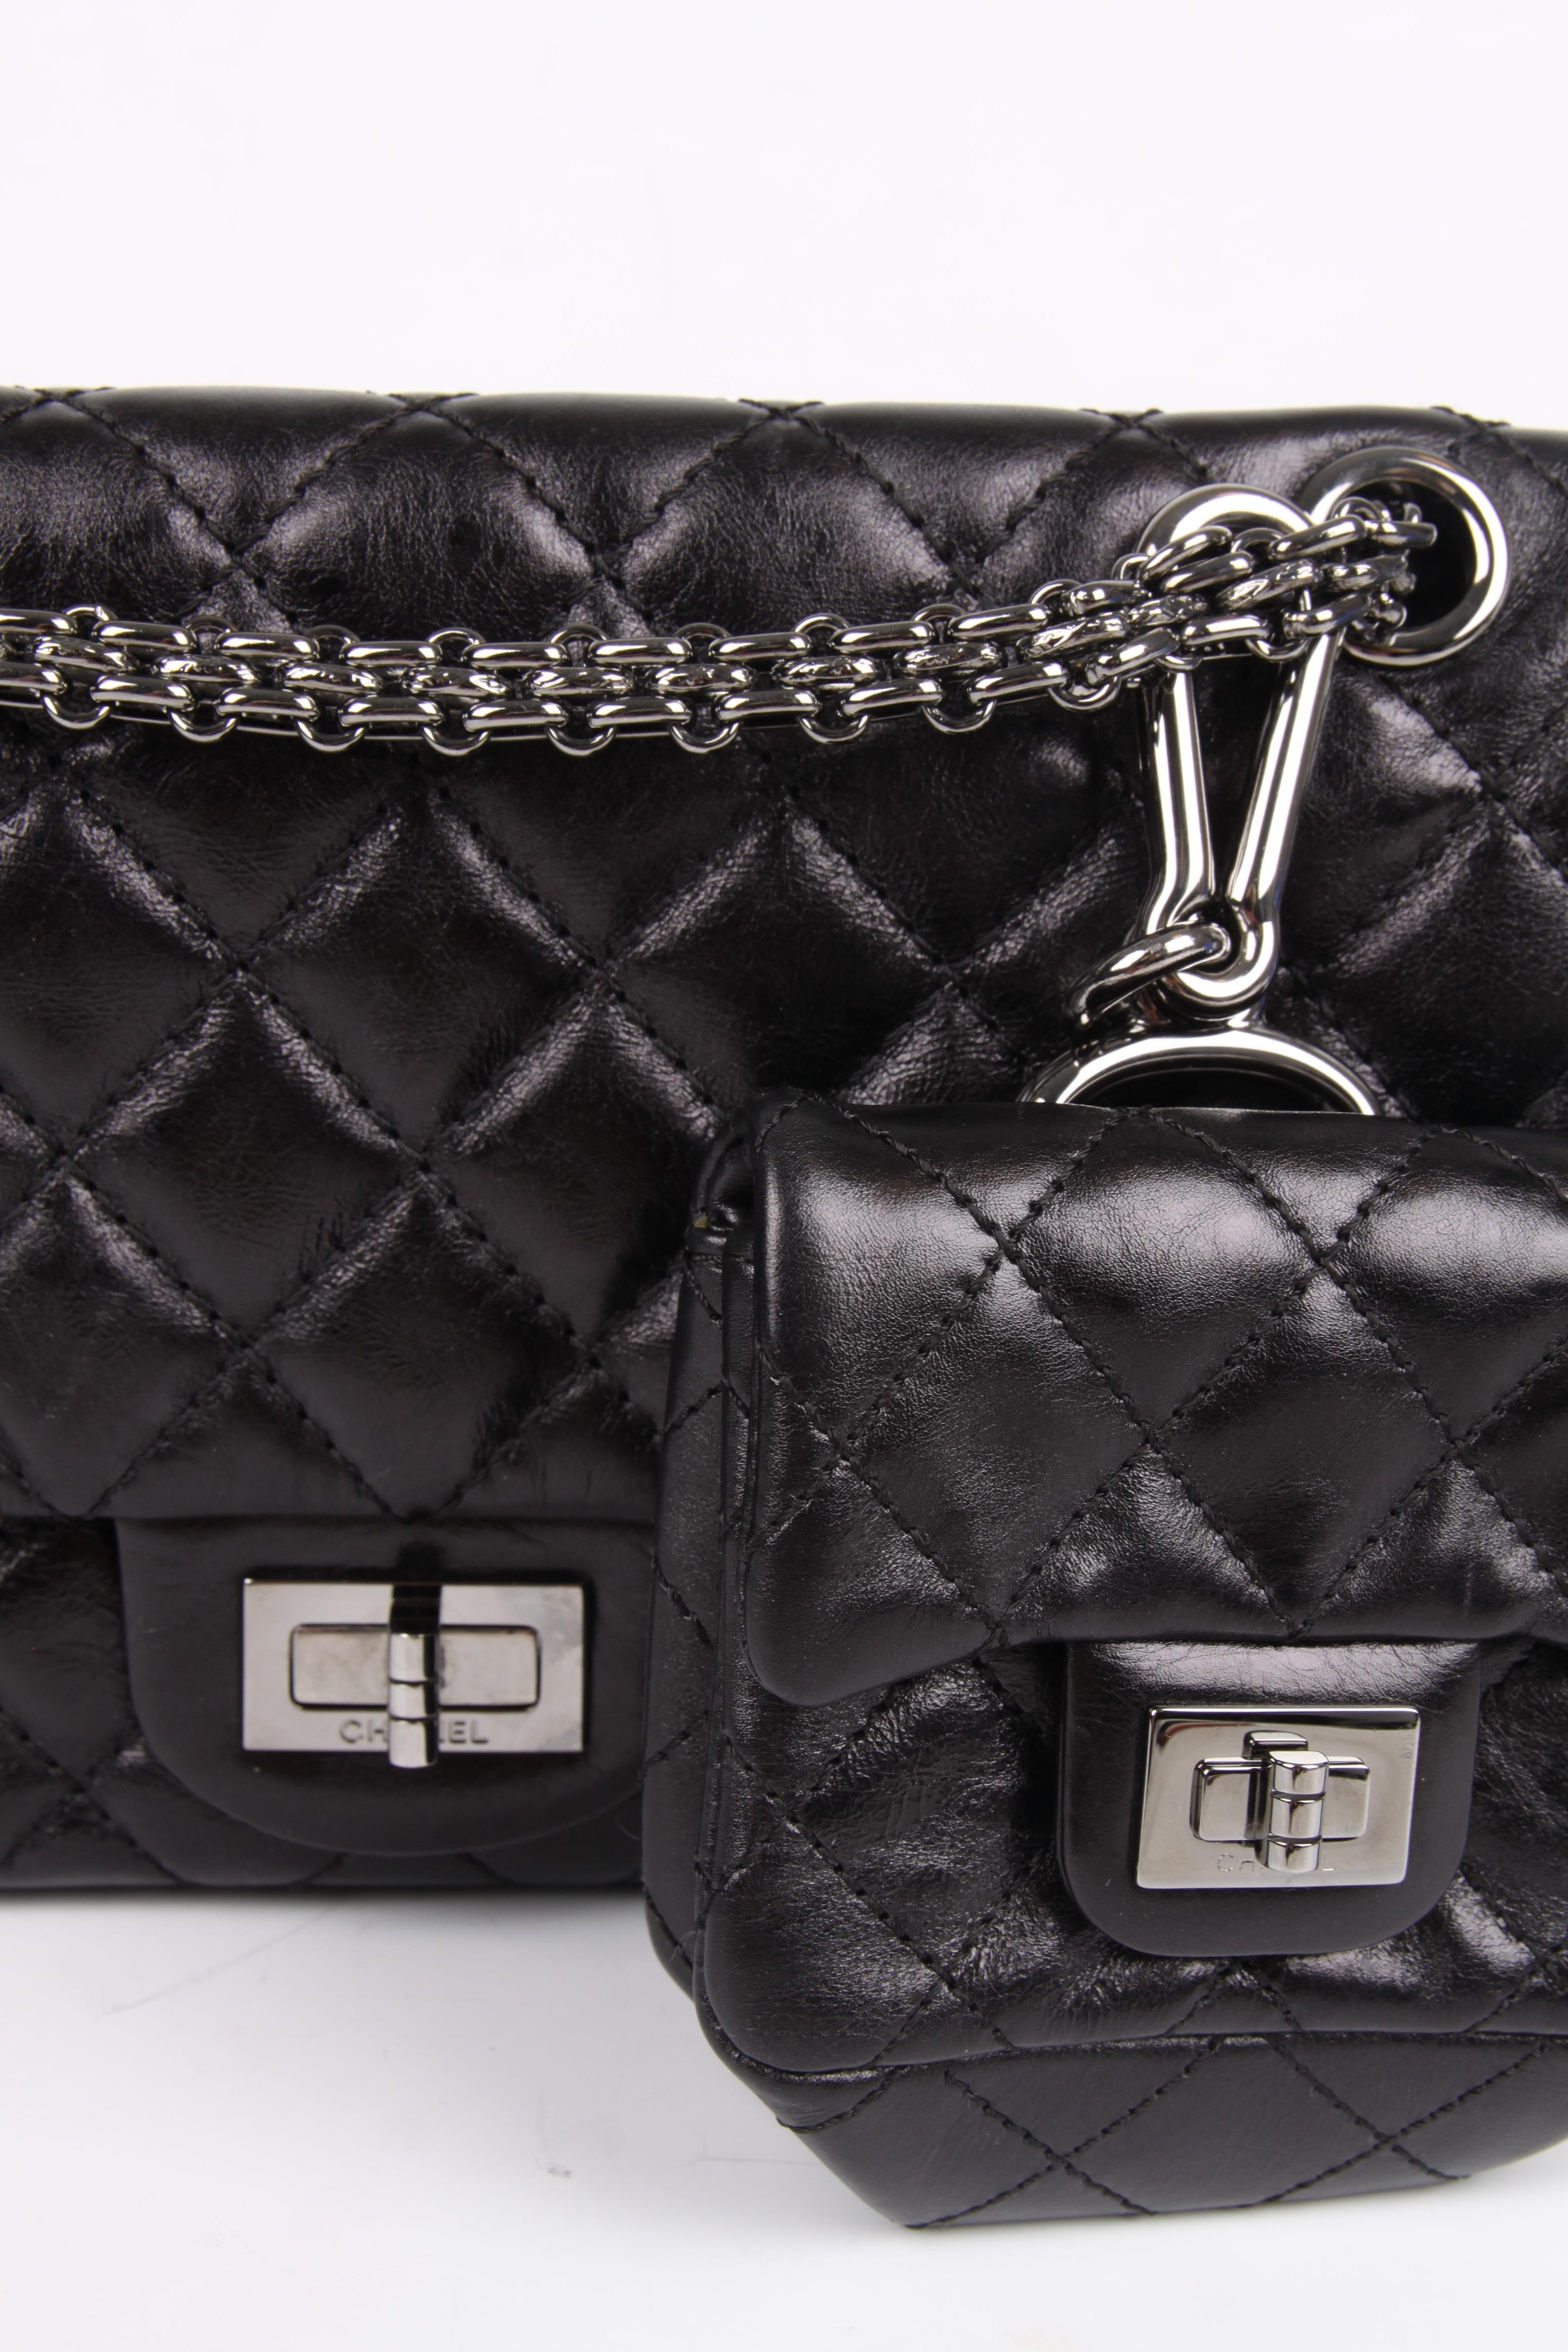 This is a limited edition from 2009, and it is soooo cool!

This black leather quilted Chanel Reissue Bag has a small mini-pochette hanging down from the silver-tone chain. Of course this small bag is detachable.

At the front a  silver-tone